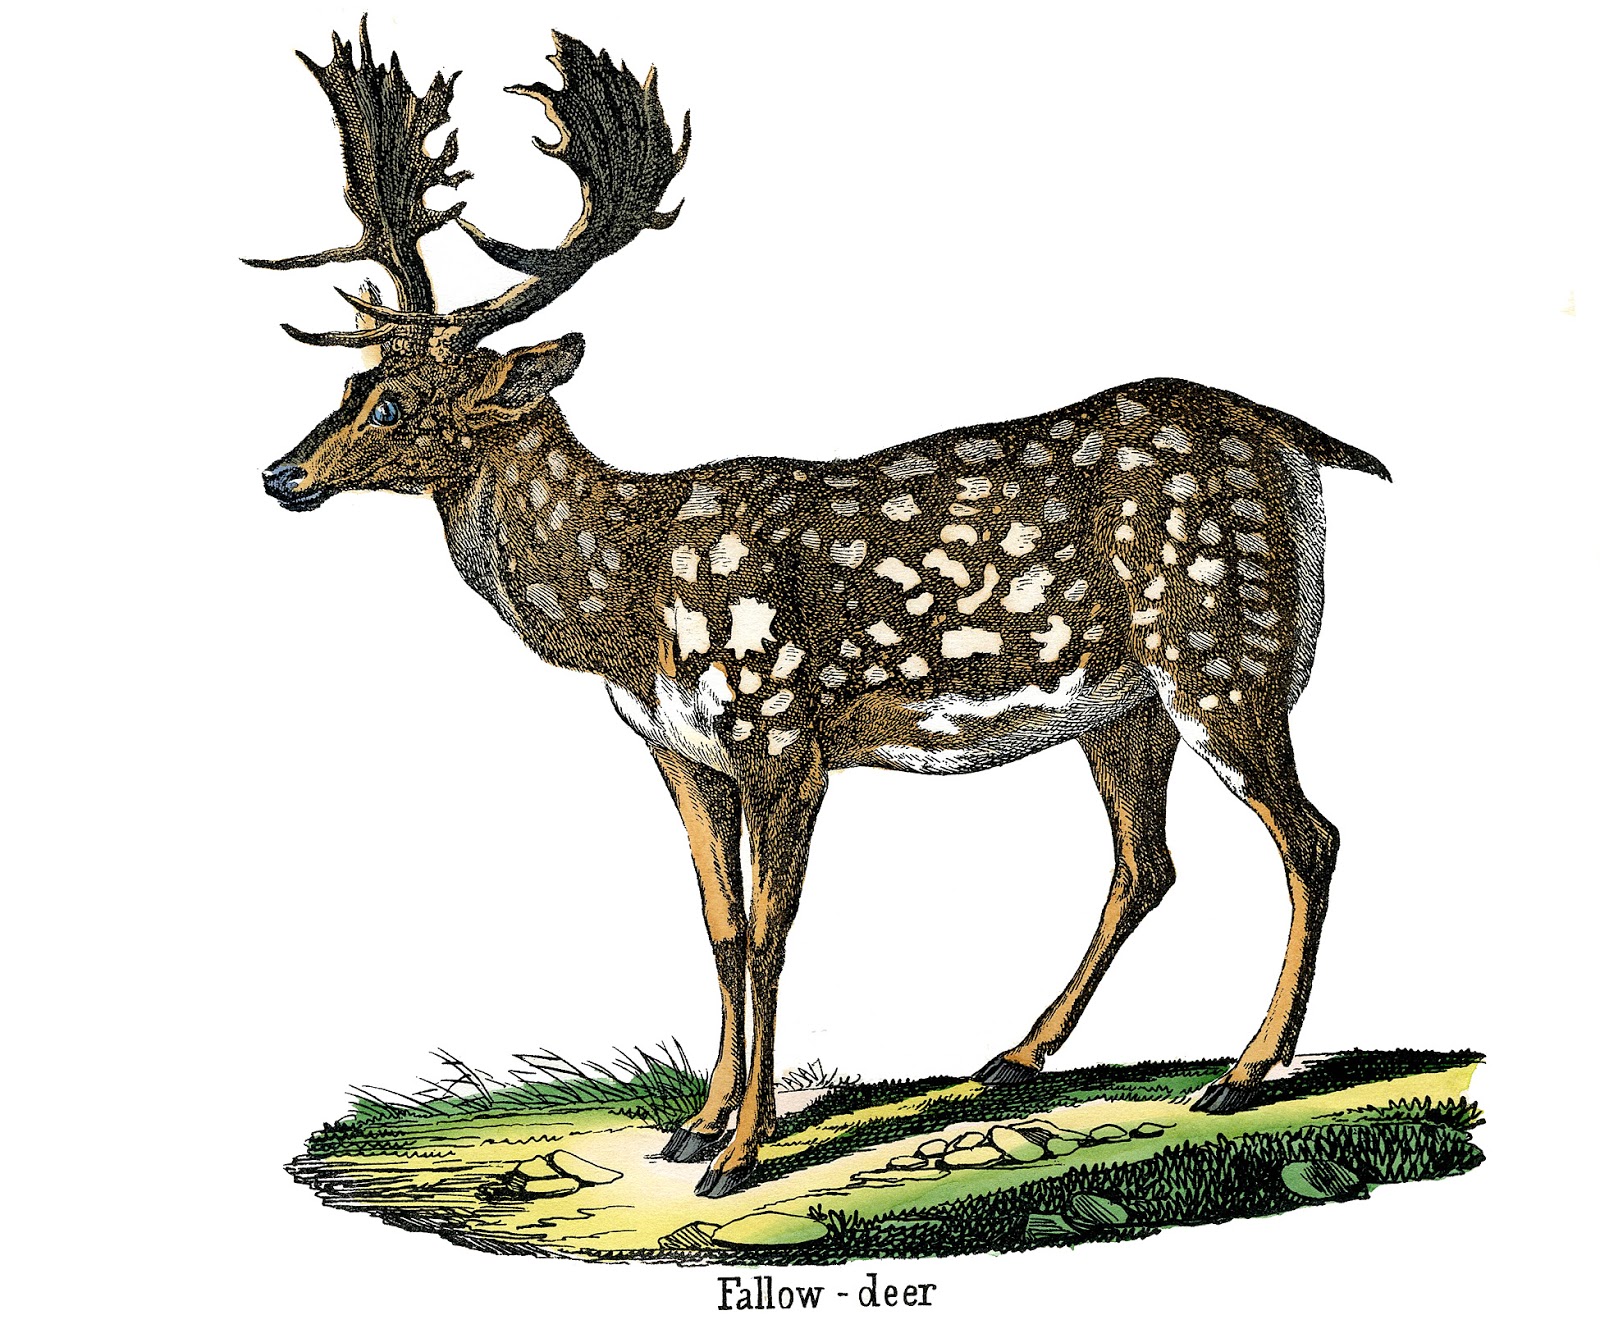 Vintage Animal Image - Fallow Deer - The Graphics Fairy